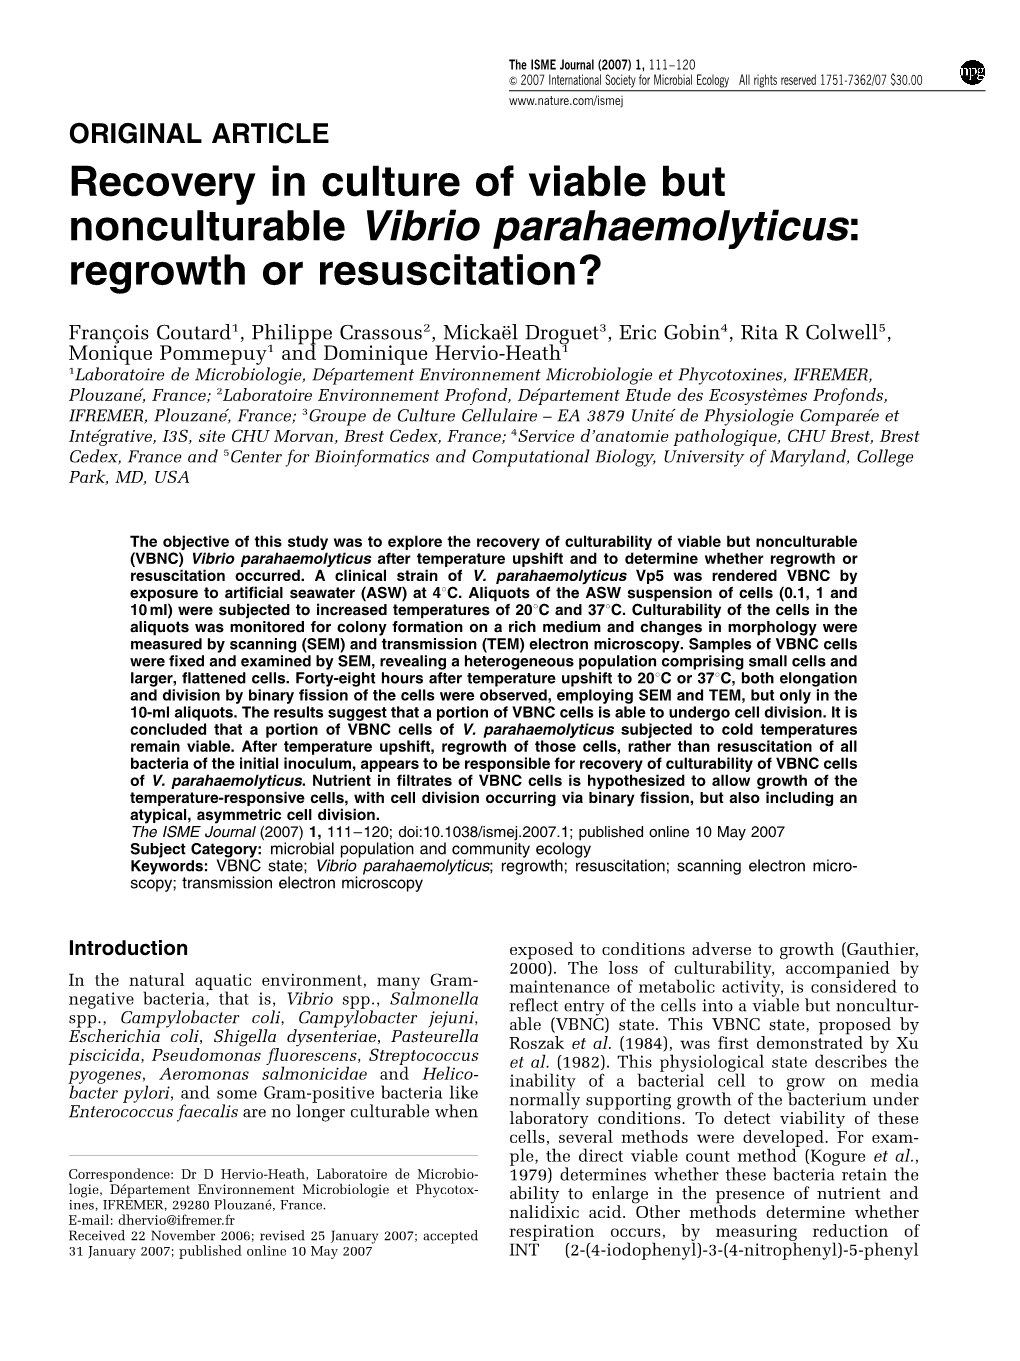 Recovery in Culture of Viable but Nonculturable Vibrio Parahaemolyticus: Regrowth Or Resuscitation?